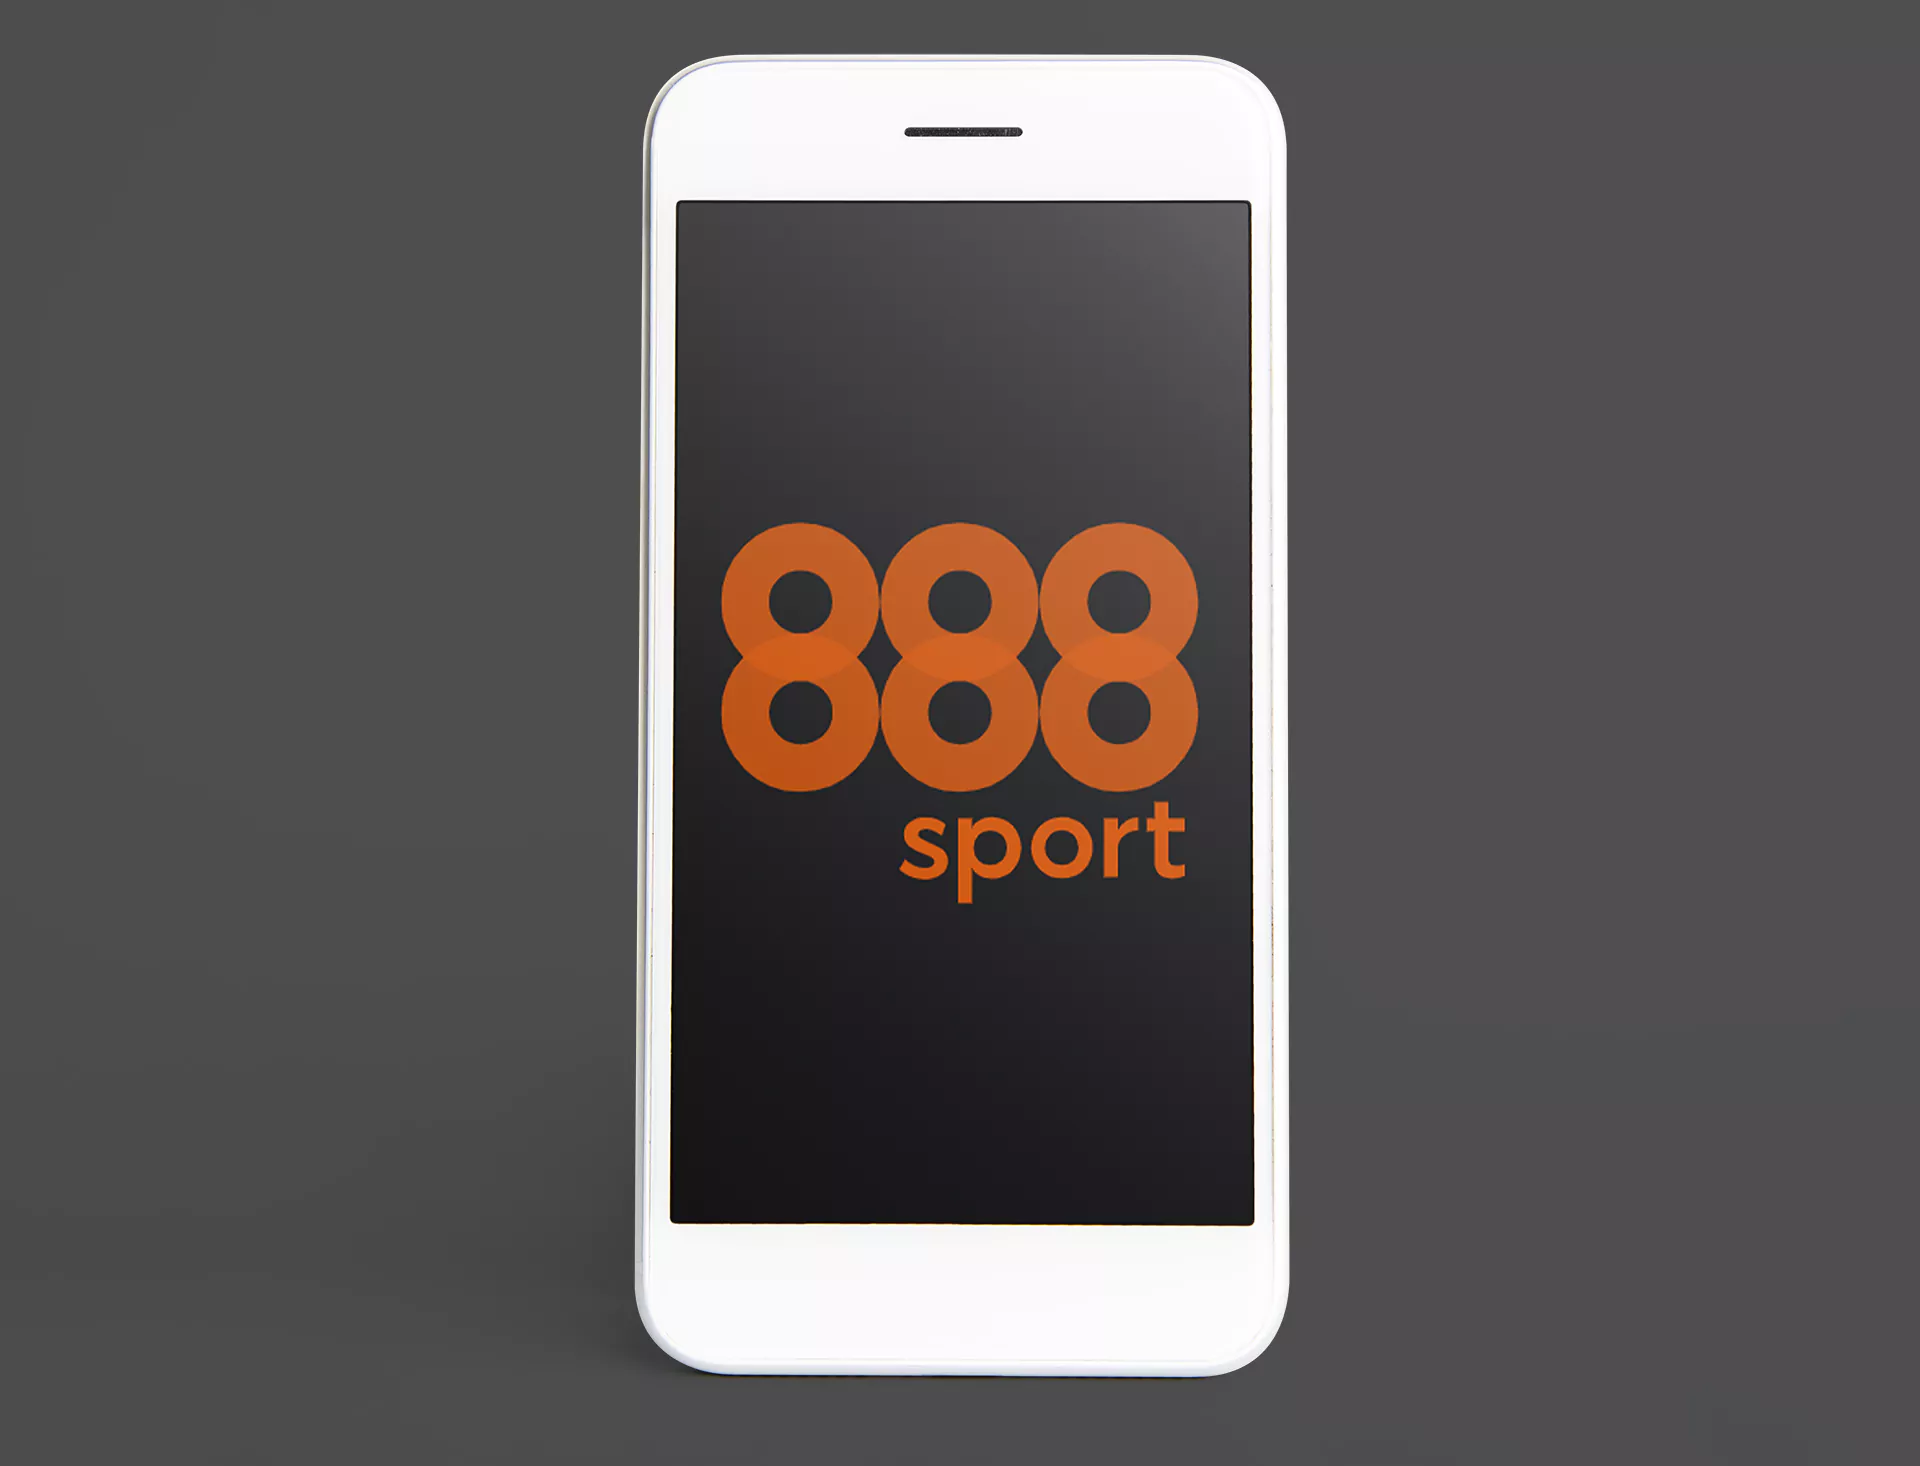 Indtall the app and register in the 888sport.